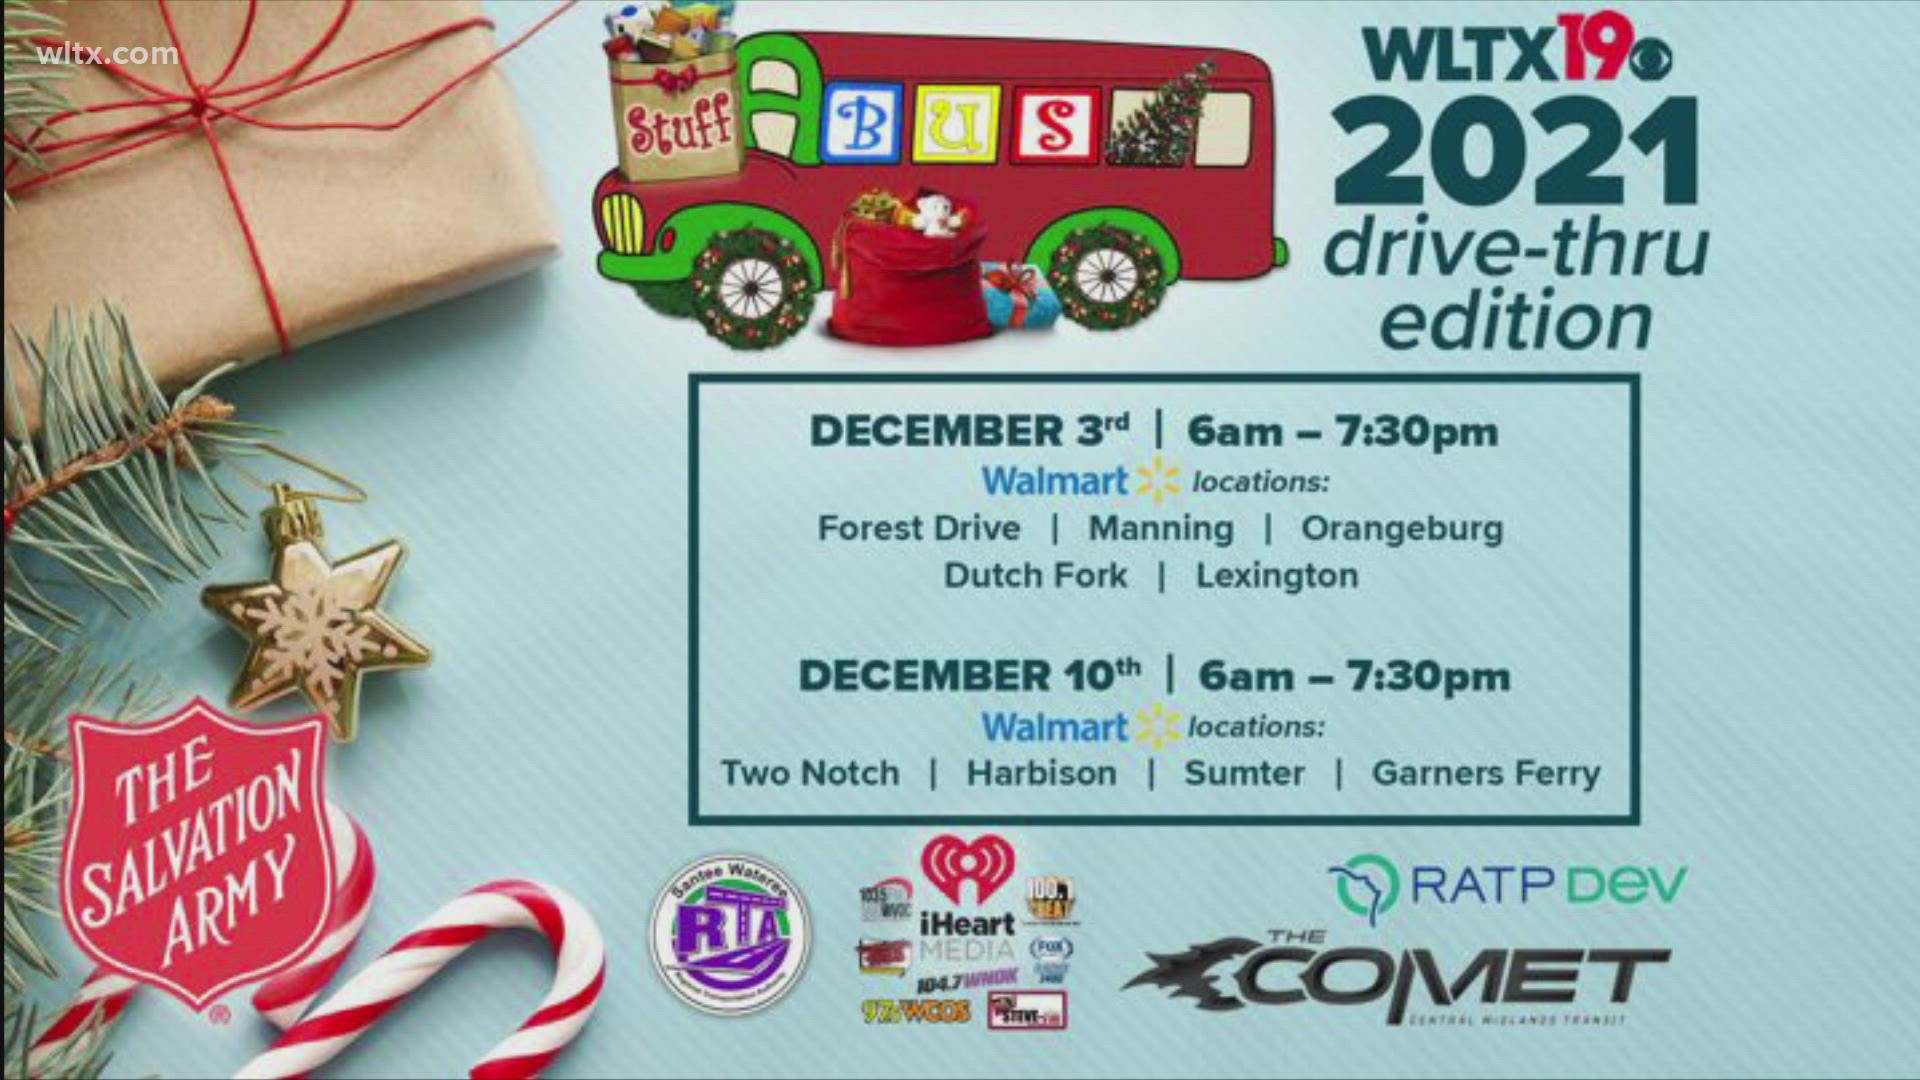 Week 1 of WLTX's annual Stuff-a-Bus campaign is over, and we're already looking toward Week 2 that'll be coming soon.